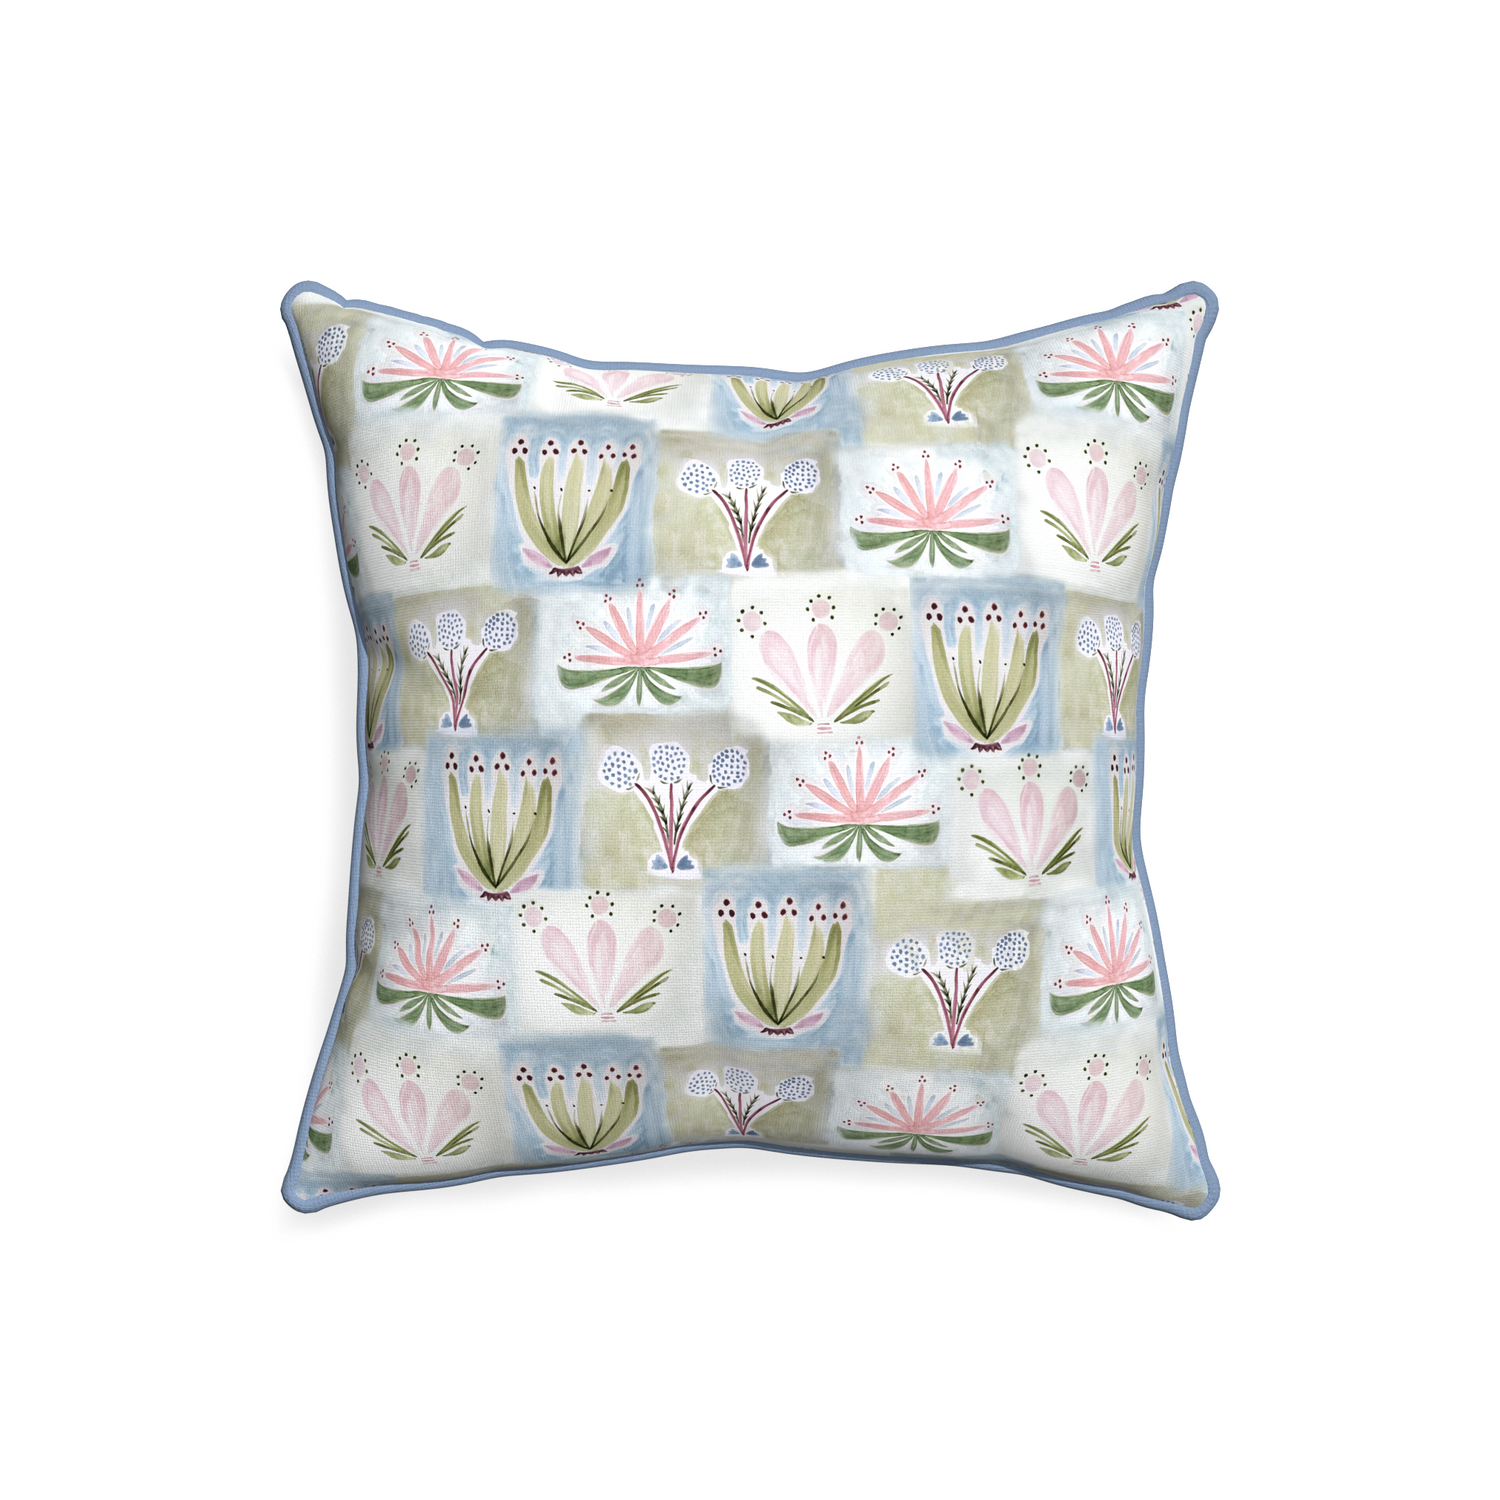 20-square harper custom hand-painted floralpillow with sky piping on white background